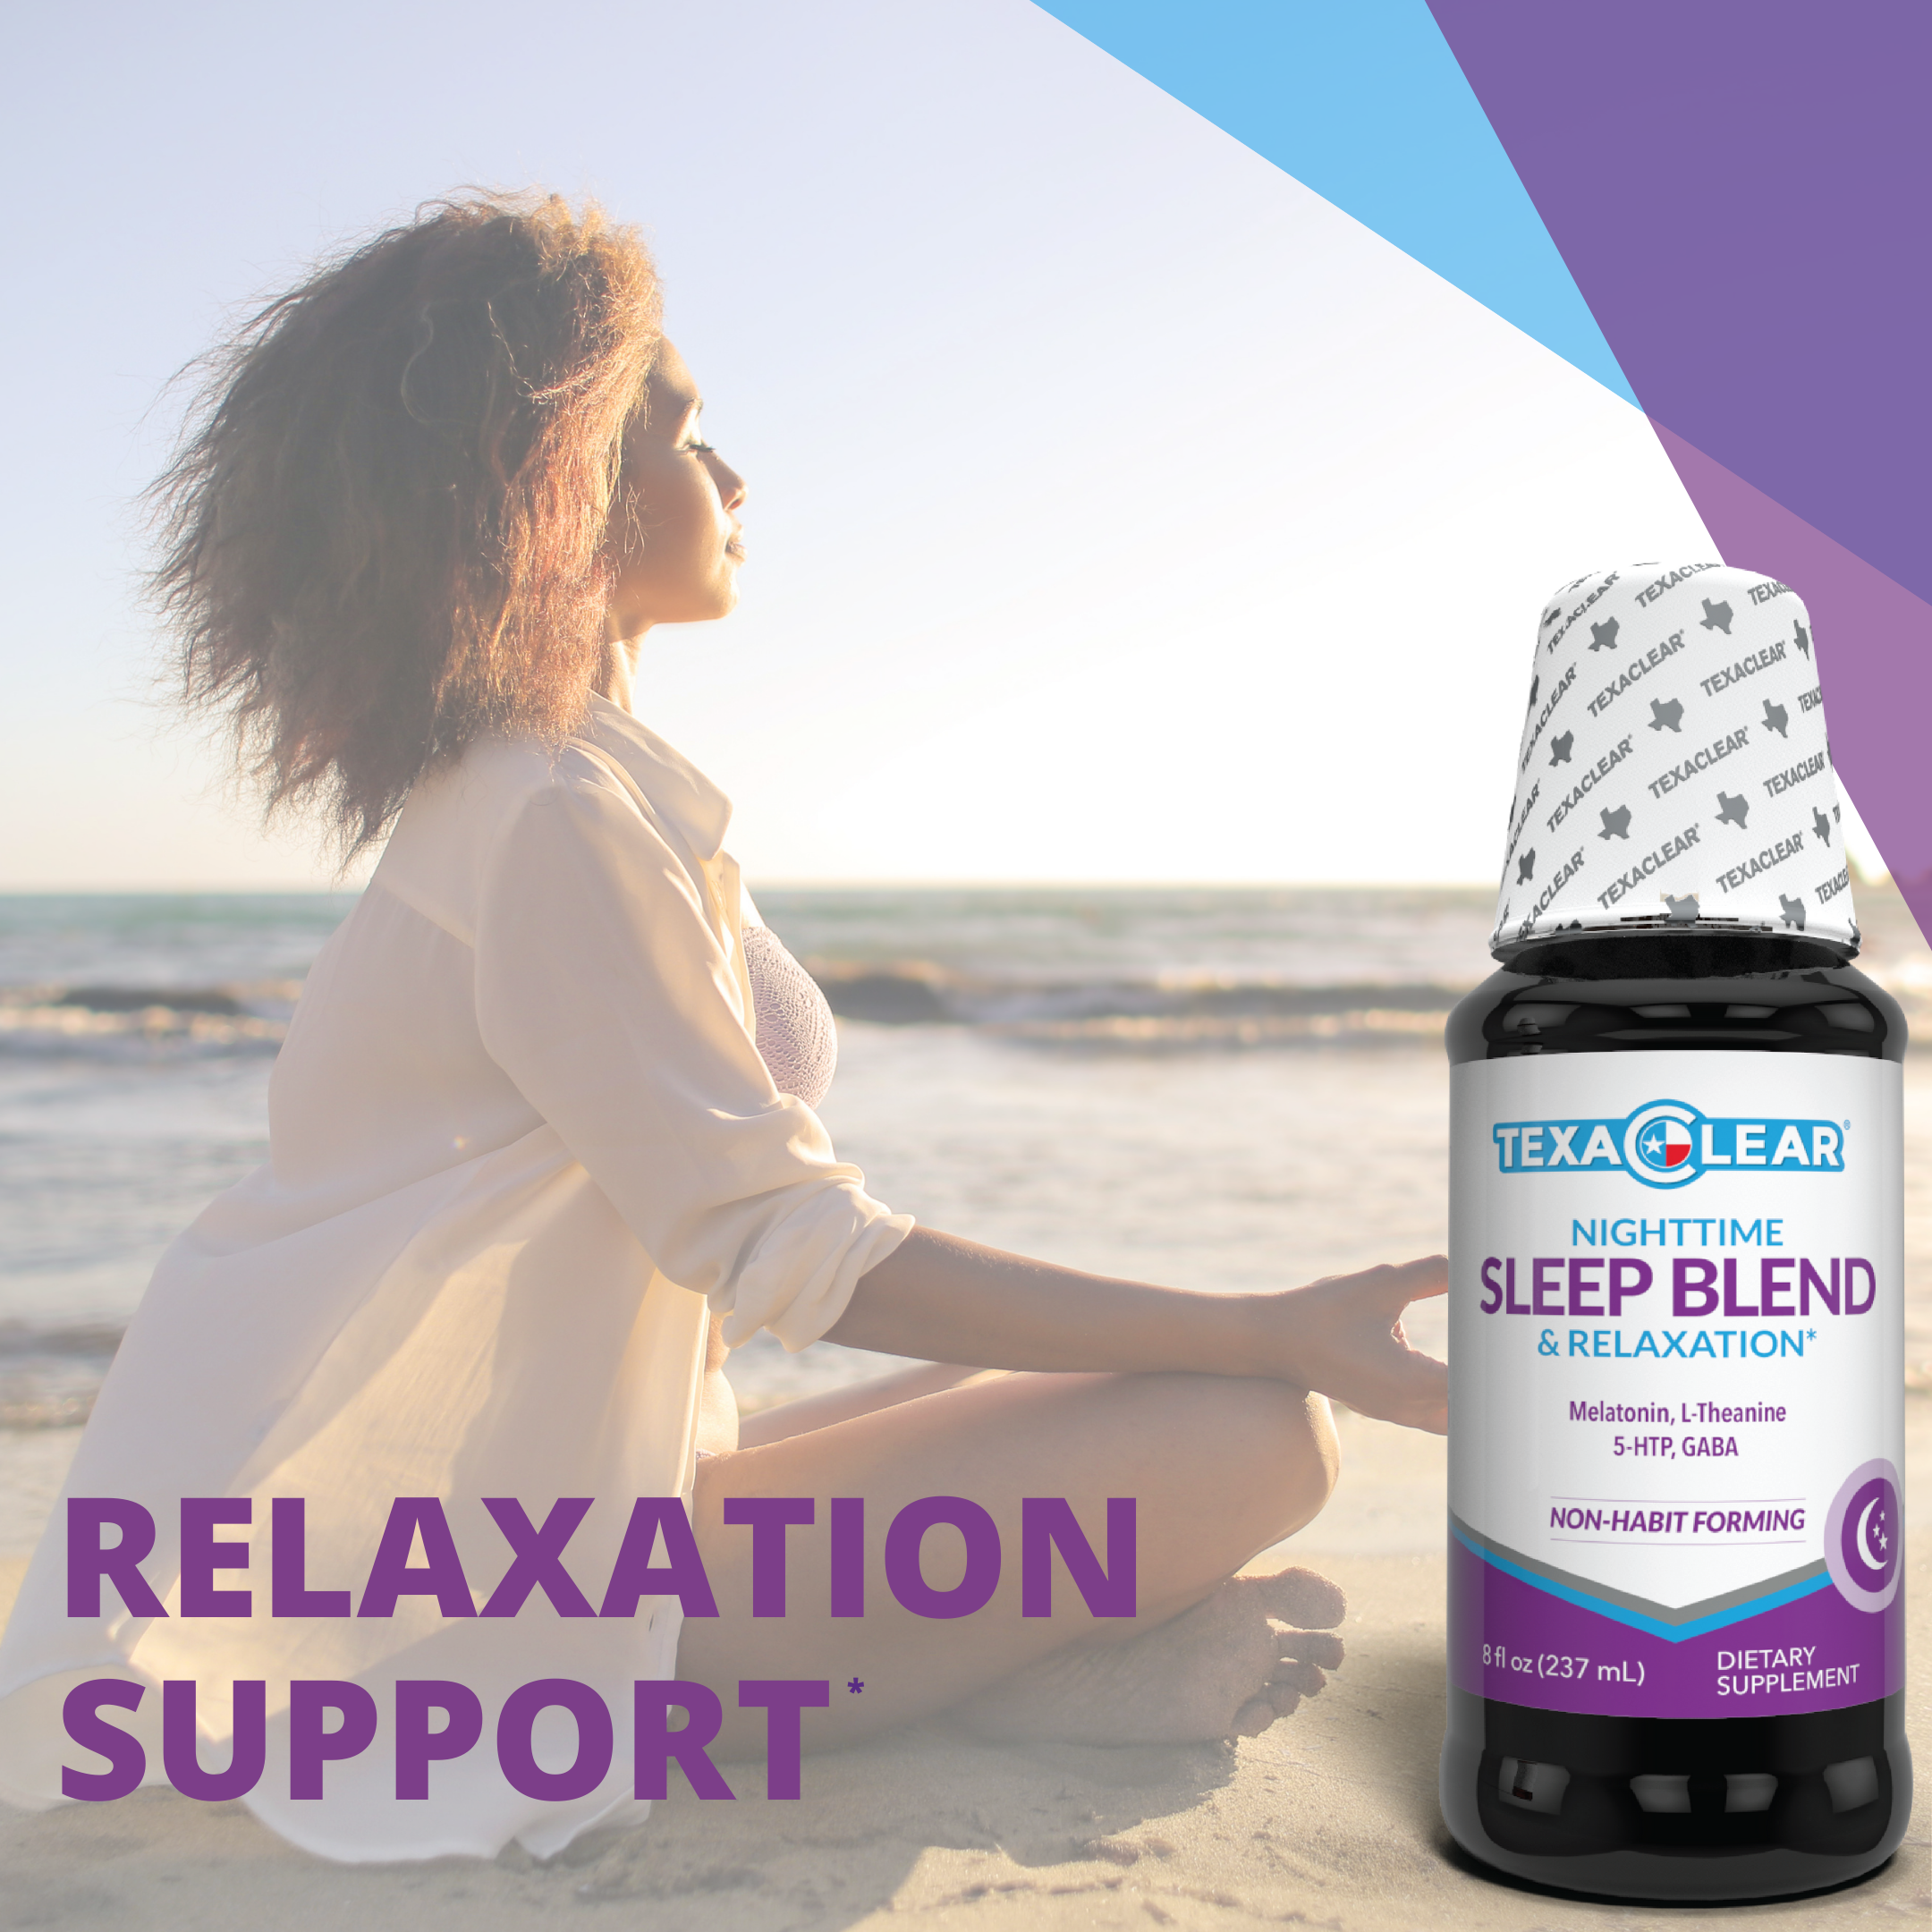 TexaClear® Sleep Blend and Relaxation Support